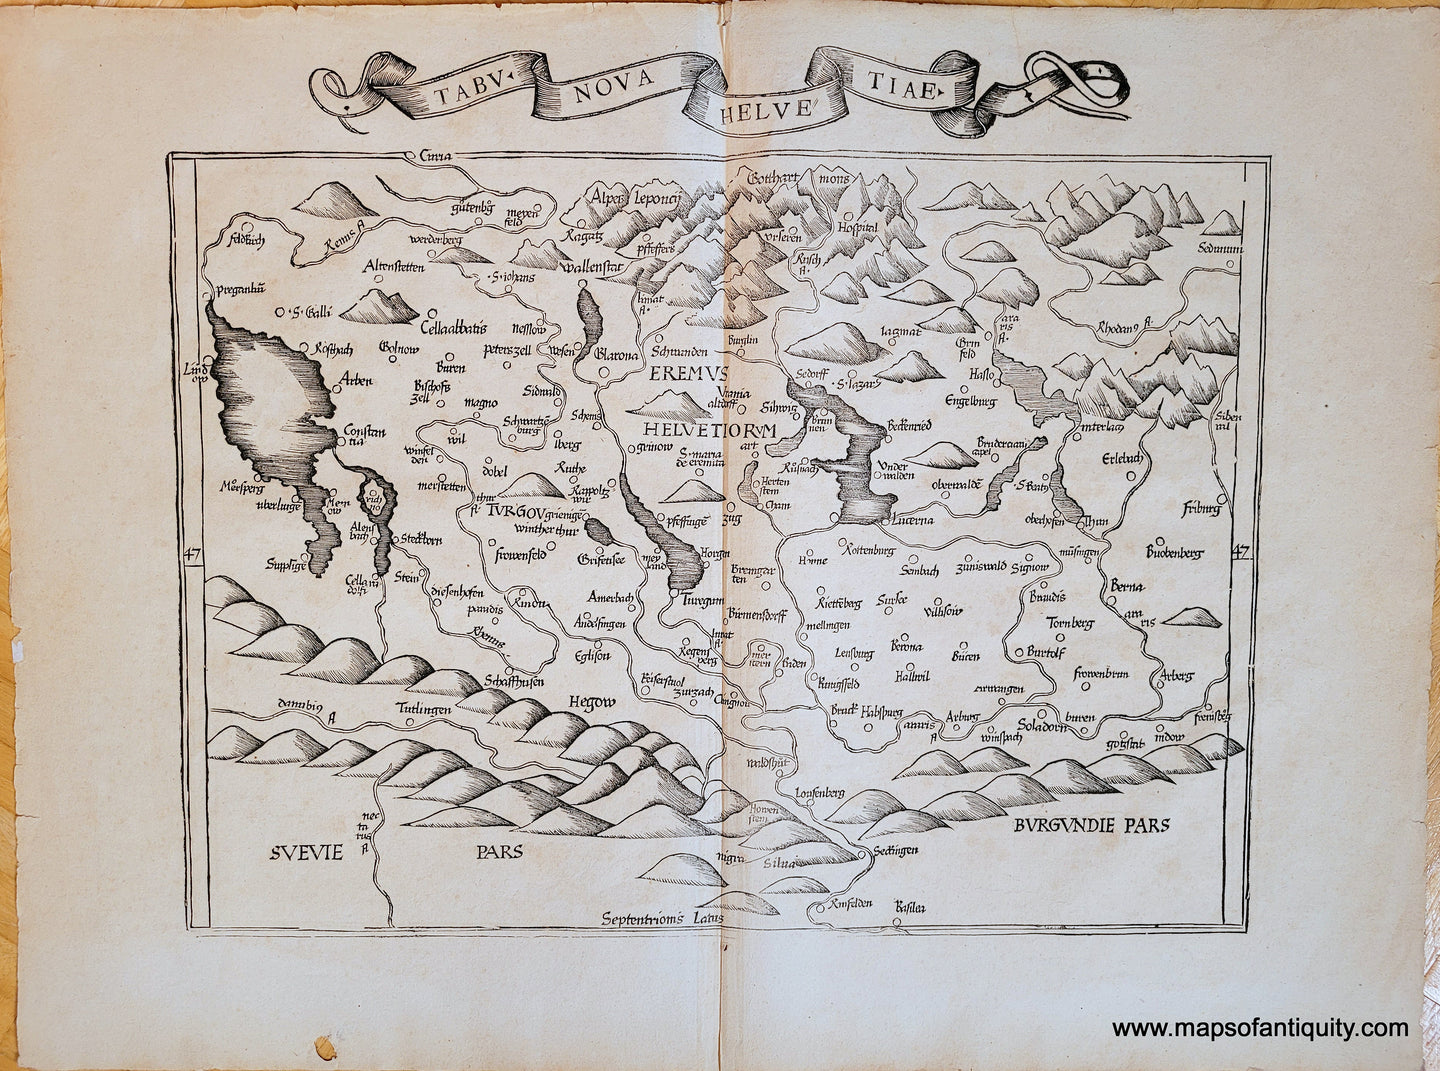 Antique map of Switzerland, woodblock print, black and white, medieval, alps at the top with mountains shown pictorially as if a bird's eye view. Germanic medieval text font, graphic style. Tolkien could have used this map as a style reference- it's quite similar!